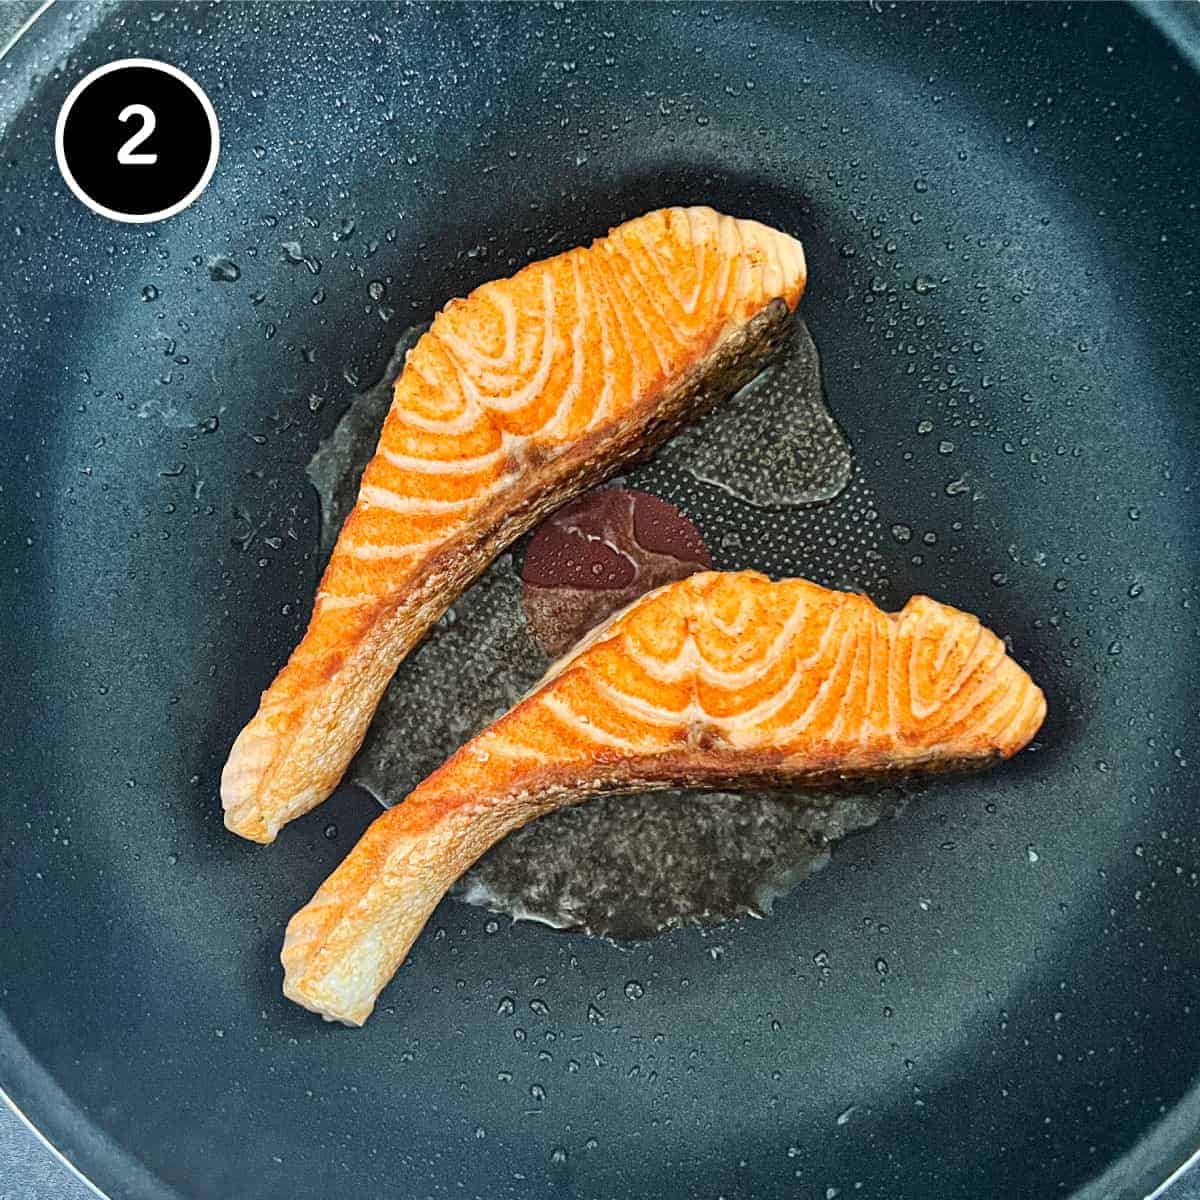 Salmon fillets being fried in a small frying pan